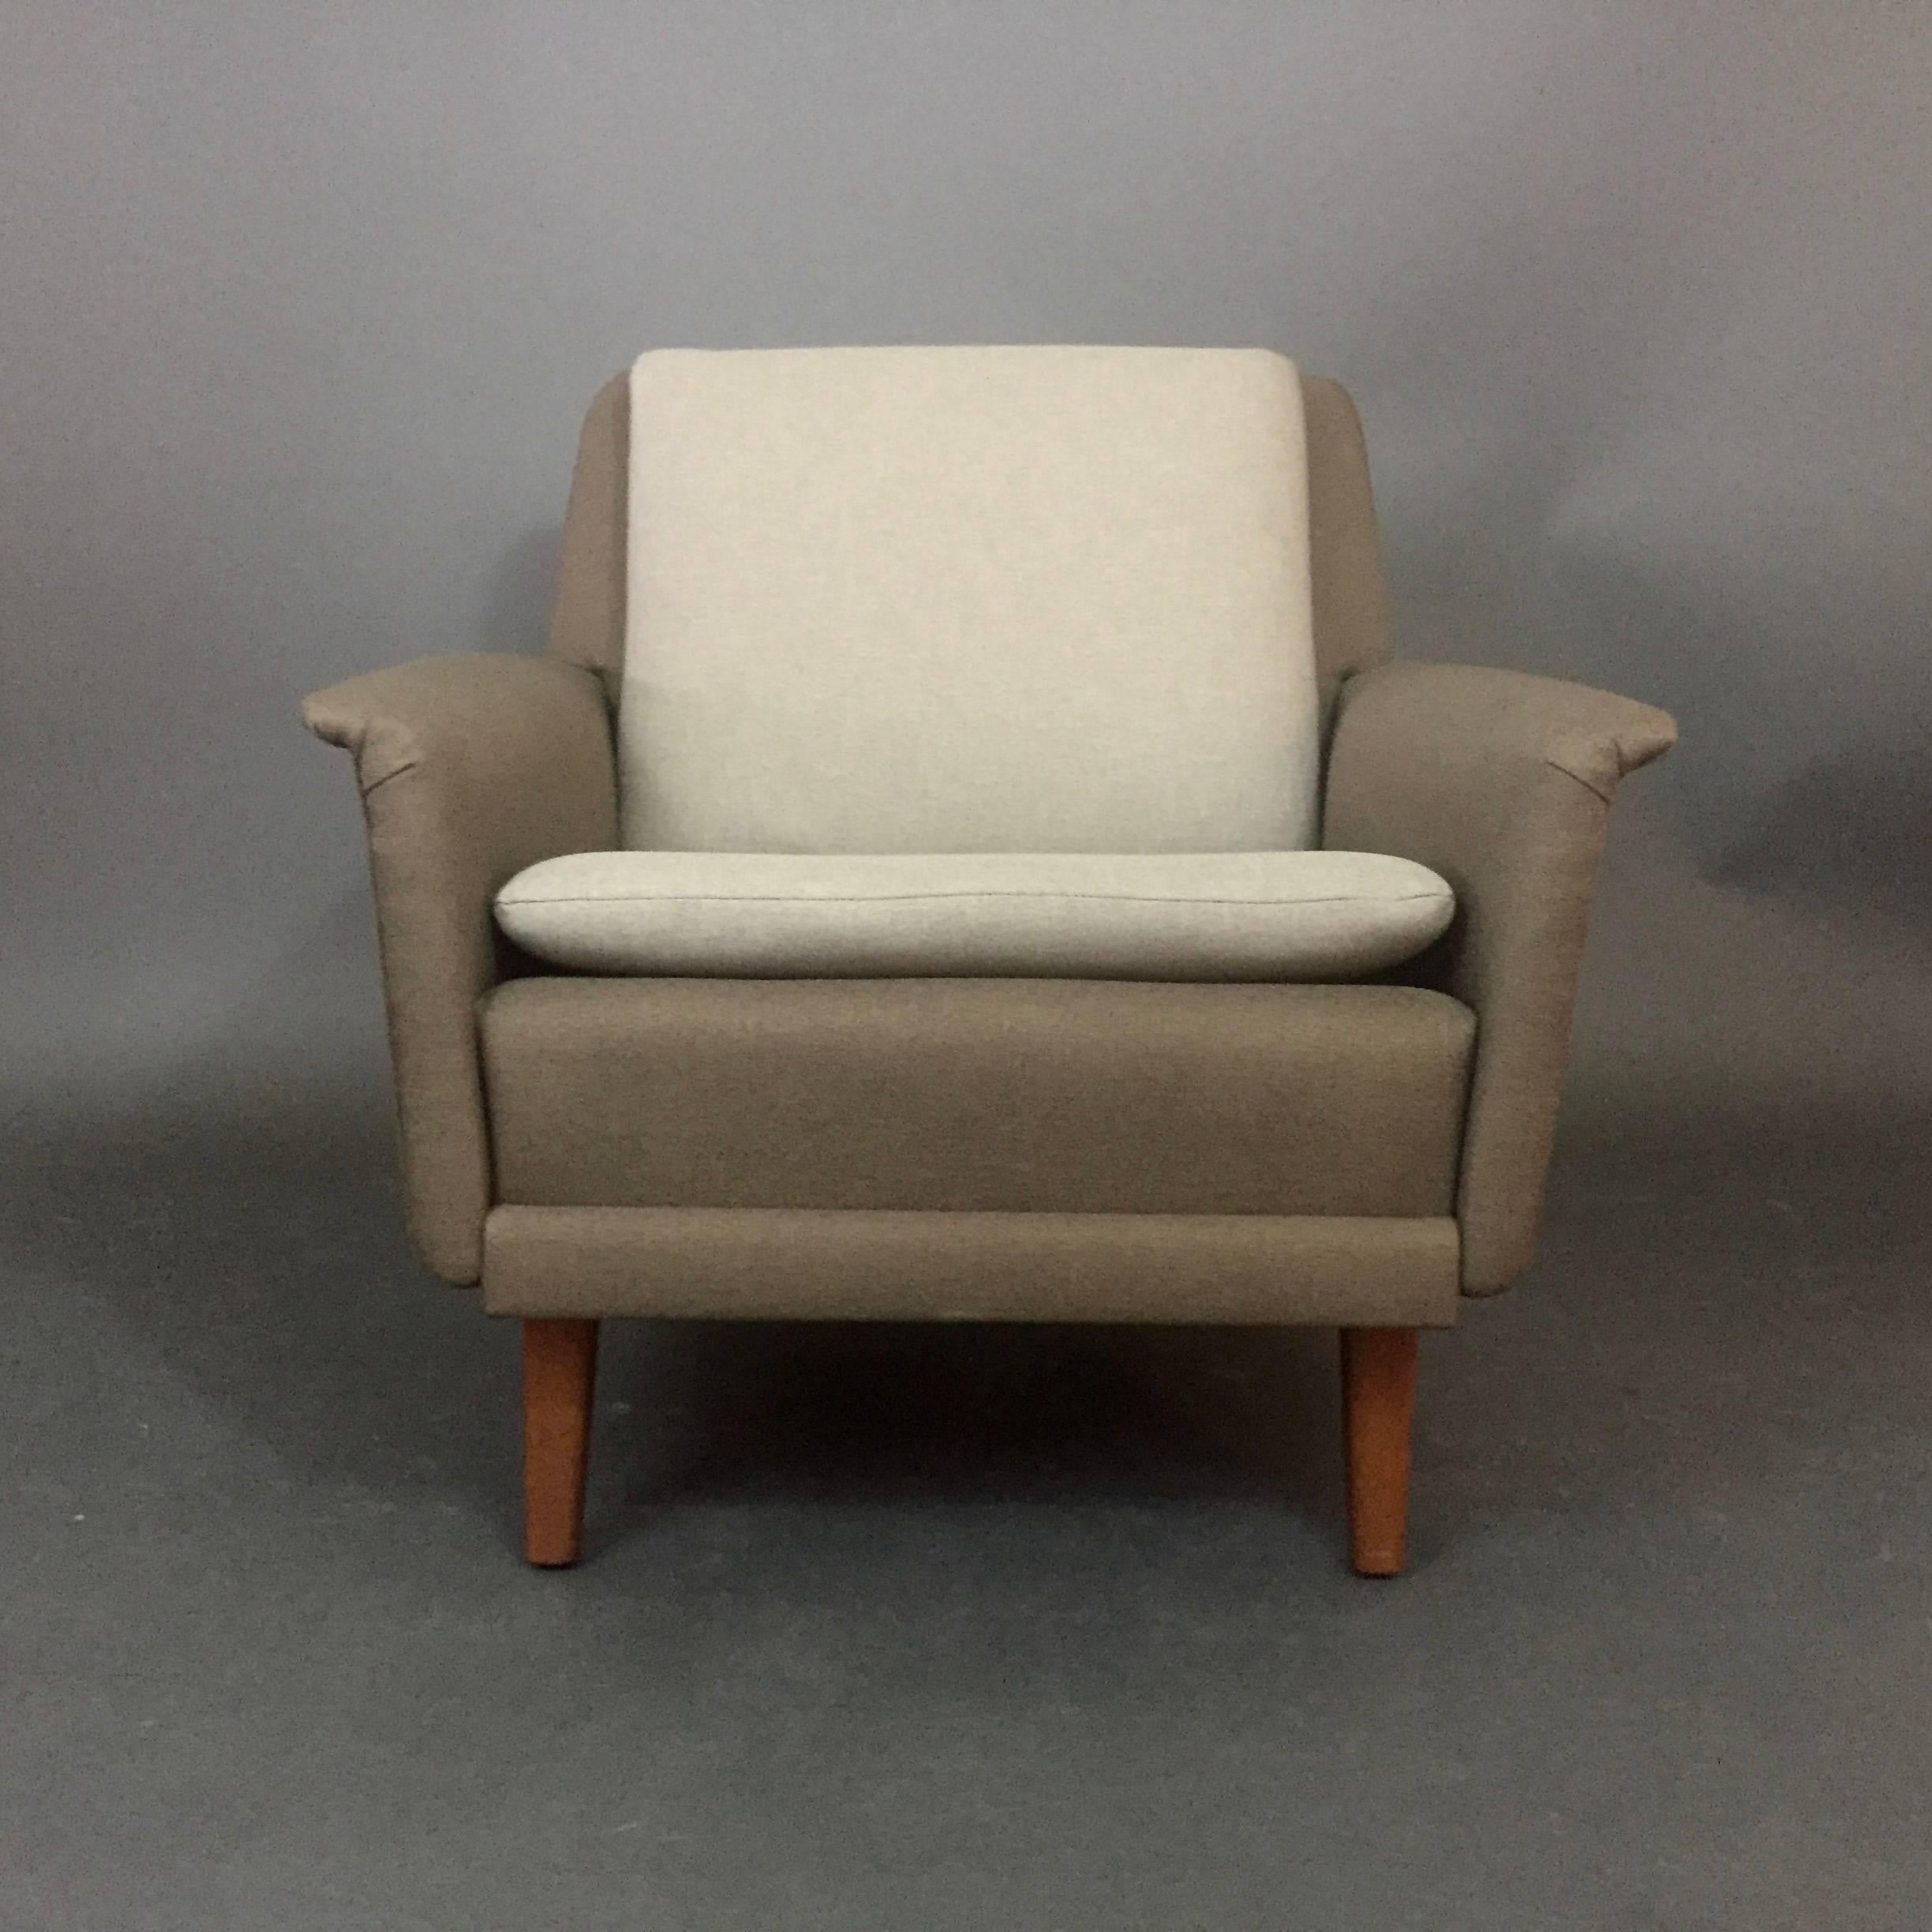 Pair of Folke Ohlsson Lounge Chairs, Denmark, 1960s For Sale 2